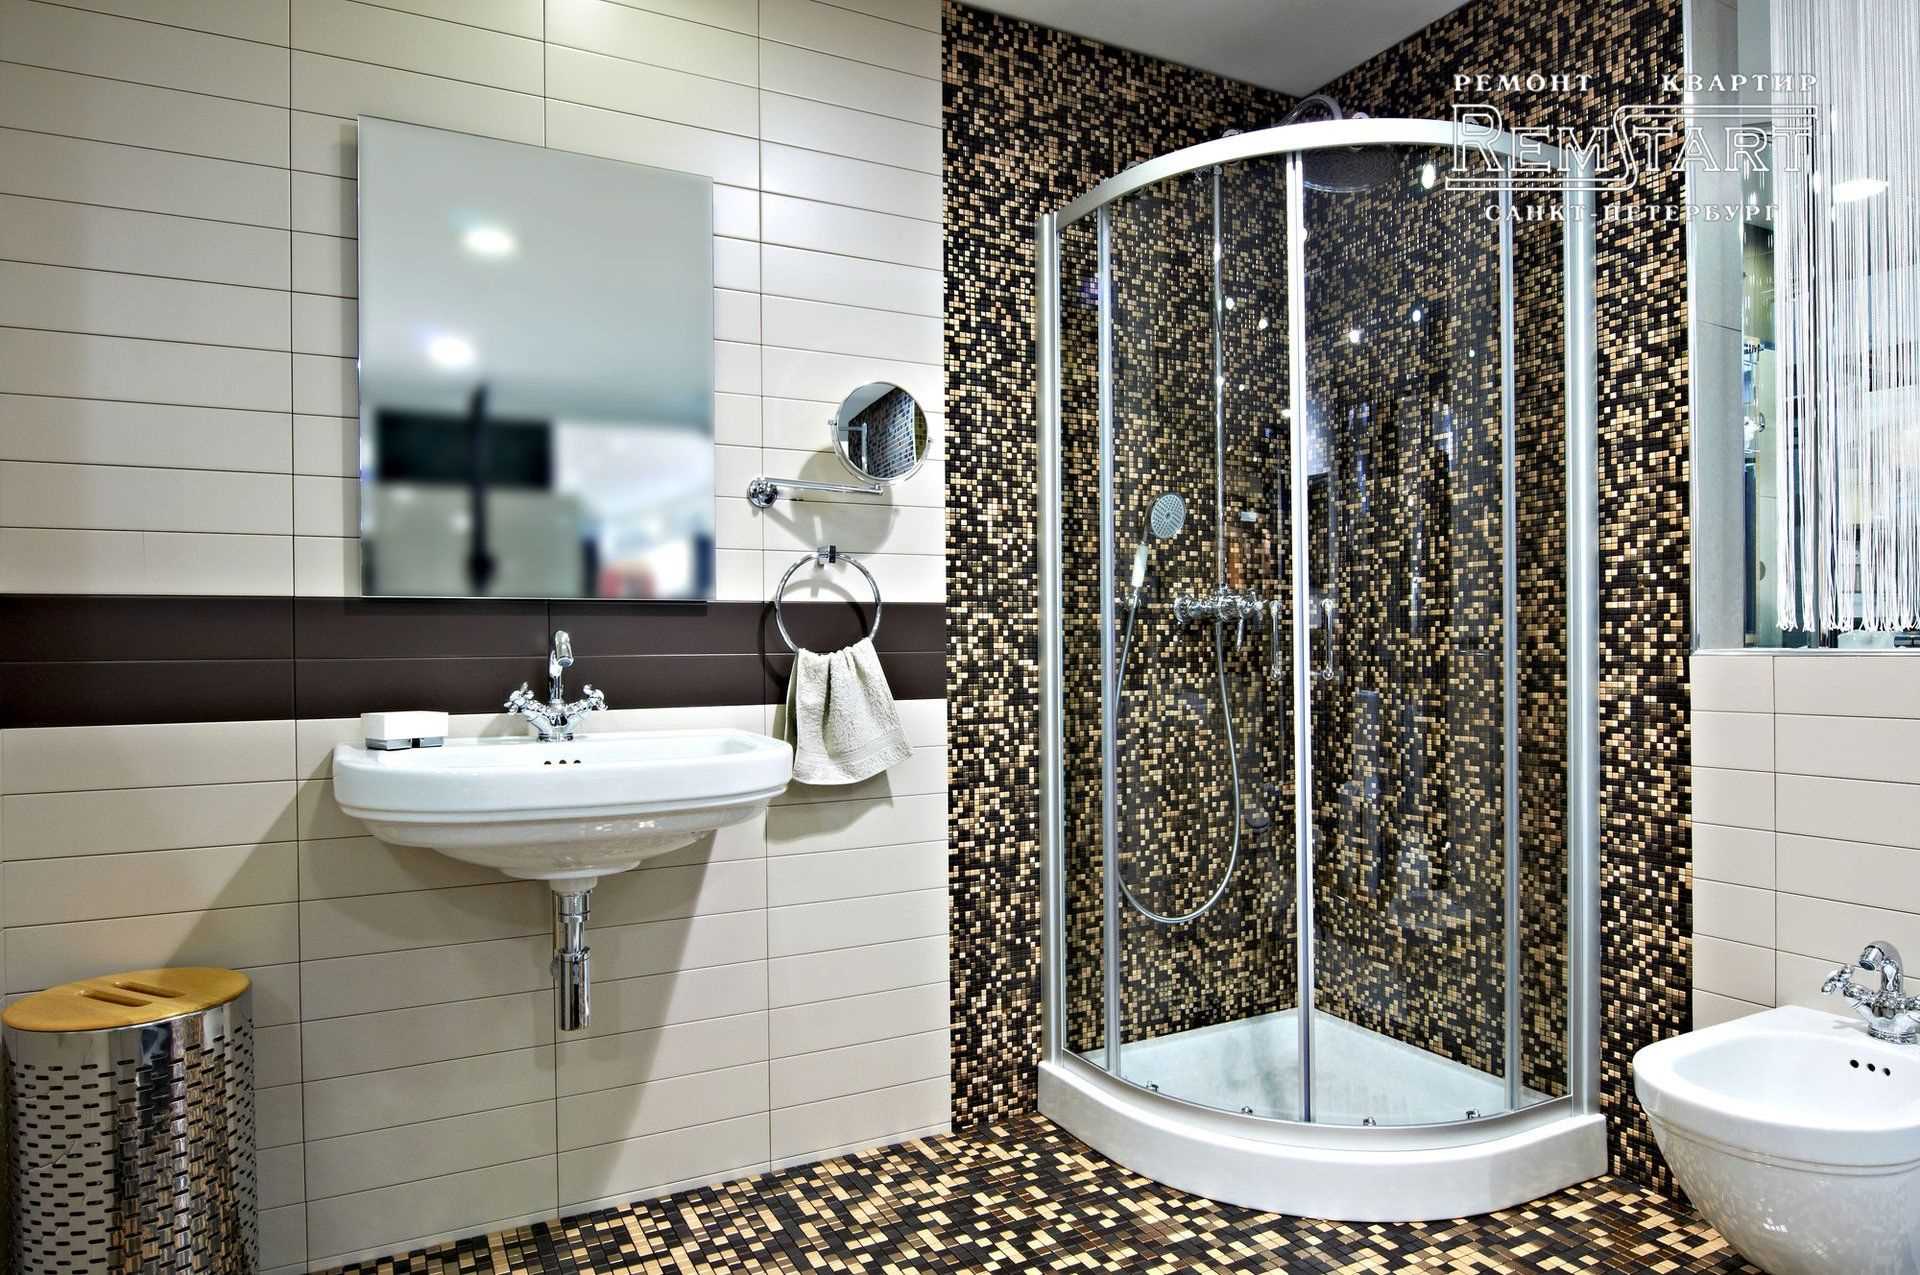 version of the modern interior of a large bathroom